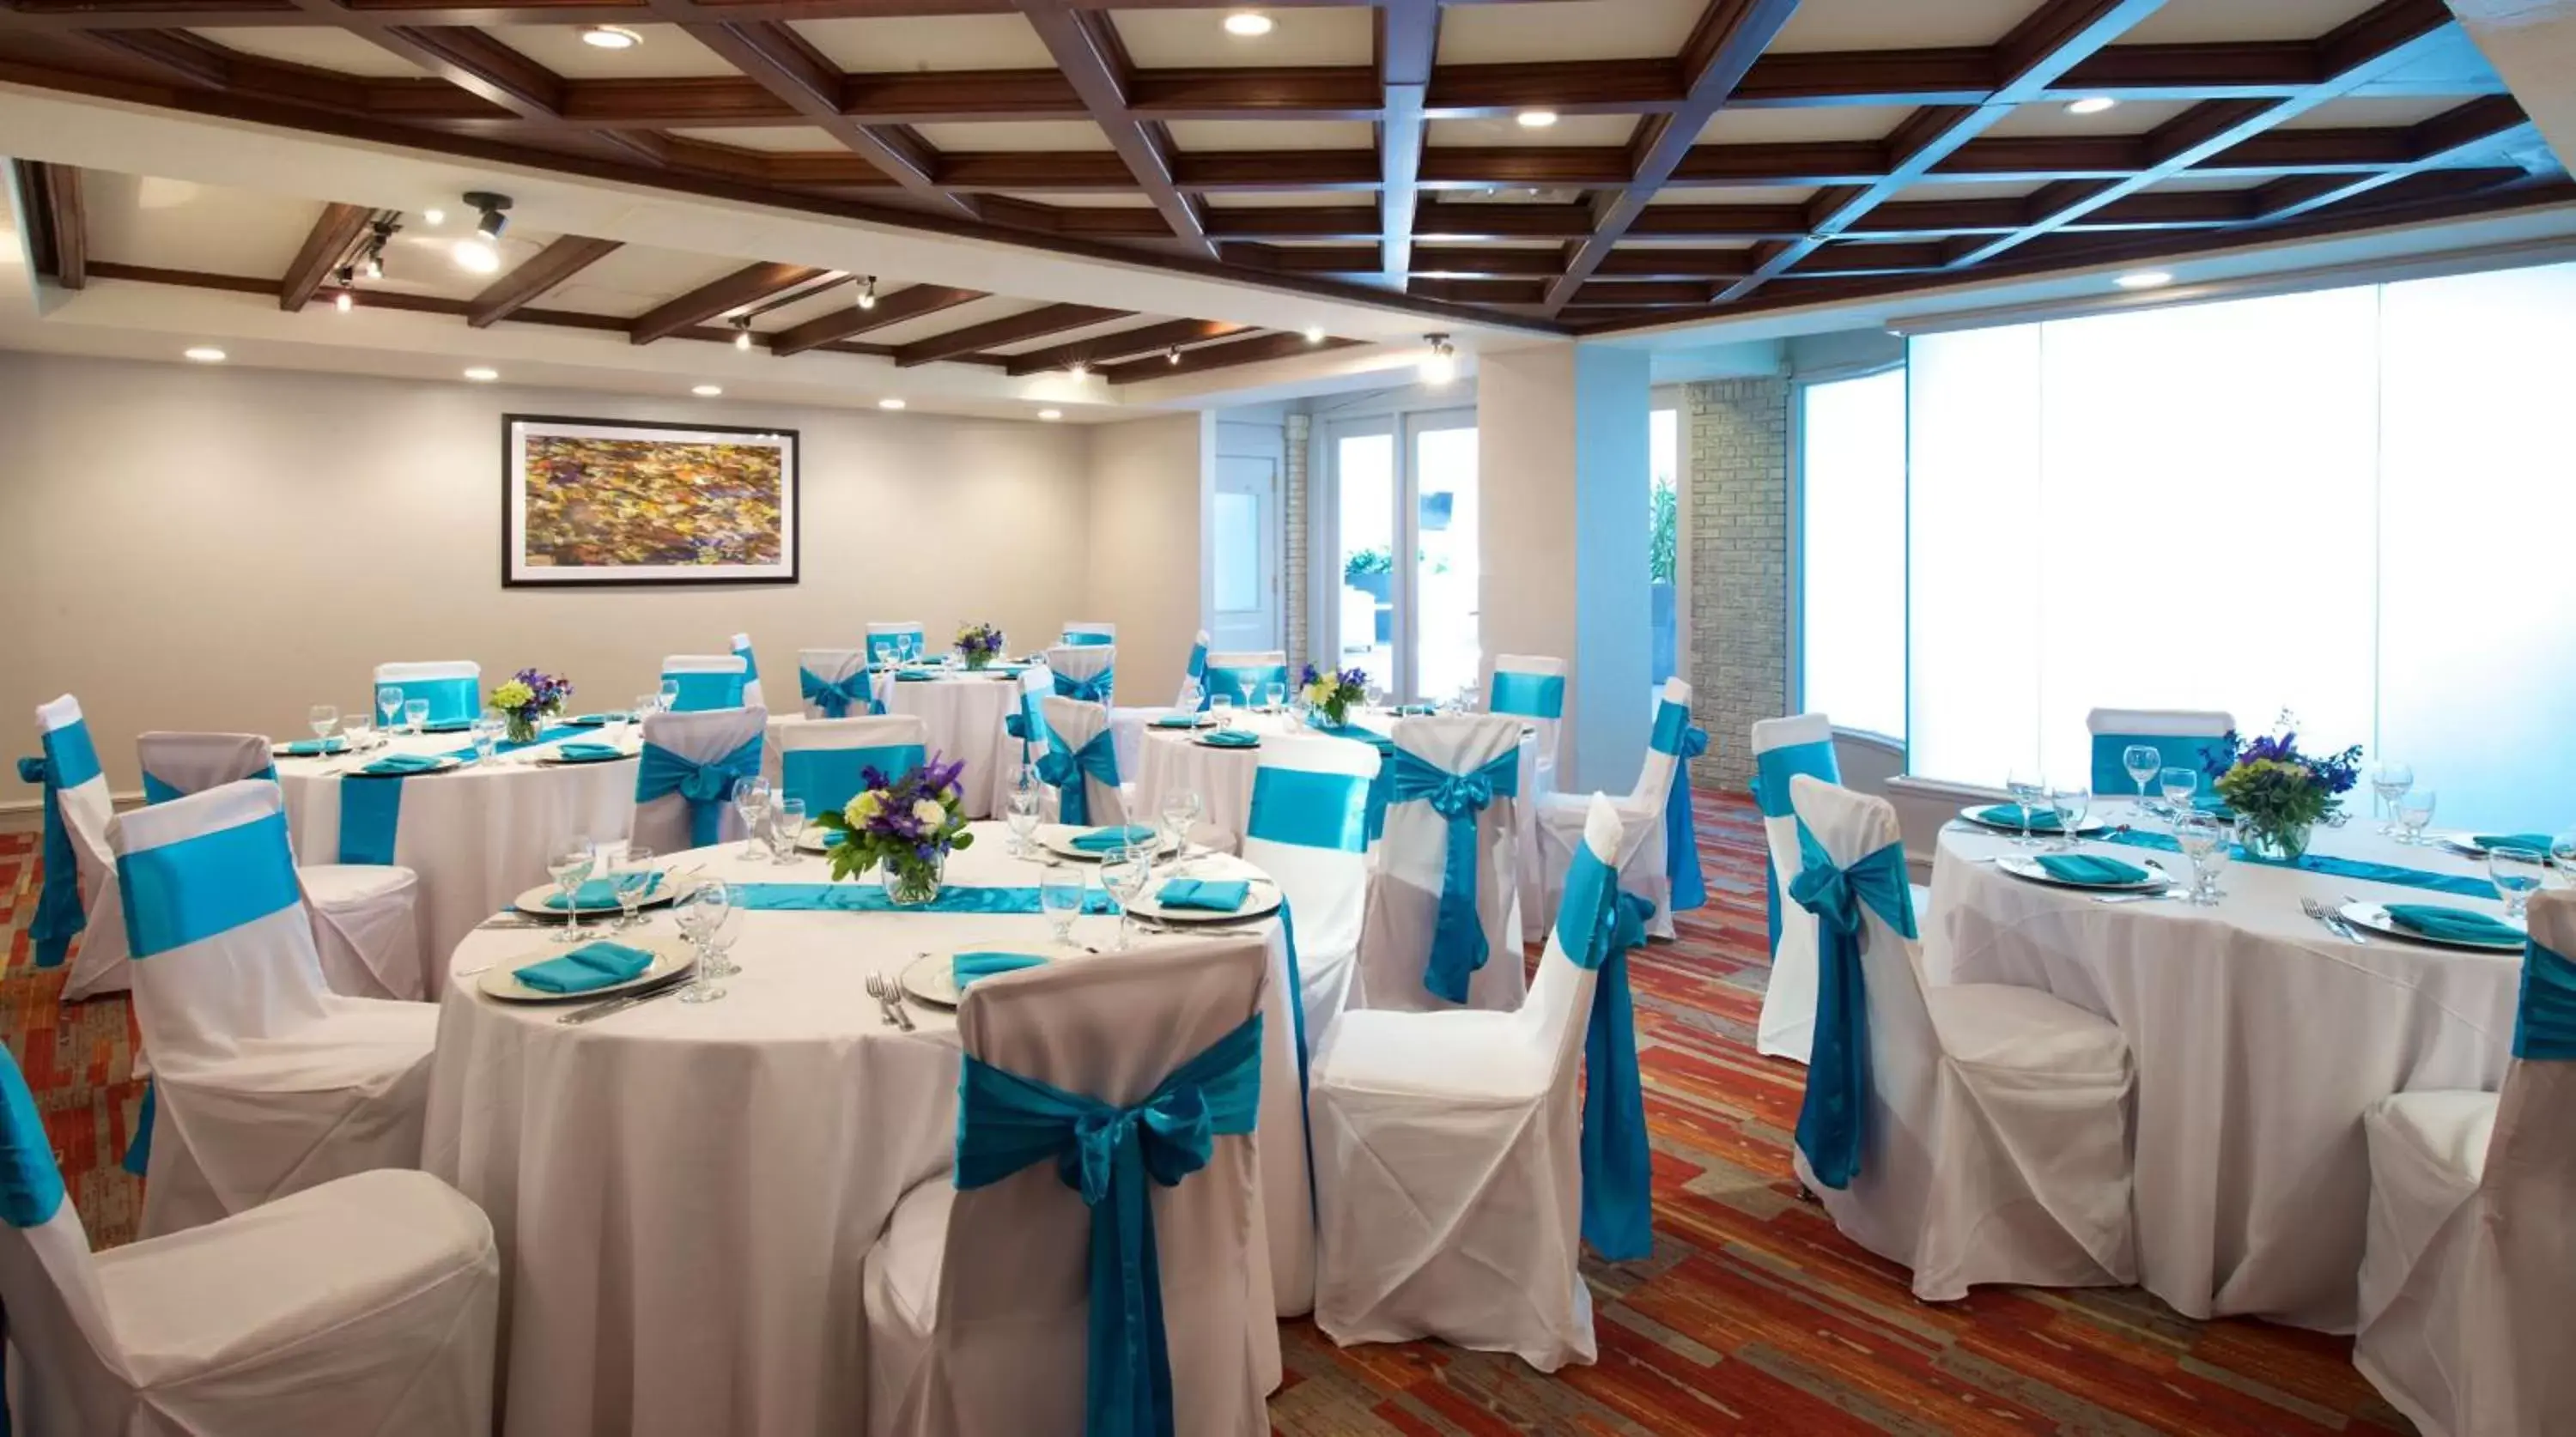 Meeting/conference room, Banquet Facilities in Embassy Suites by Hilton Colorado Springs